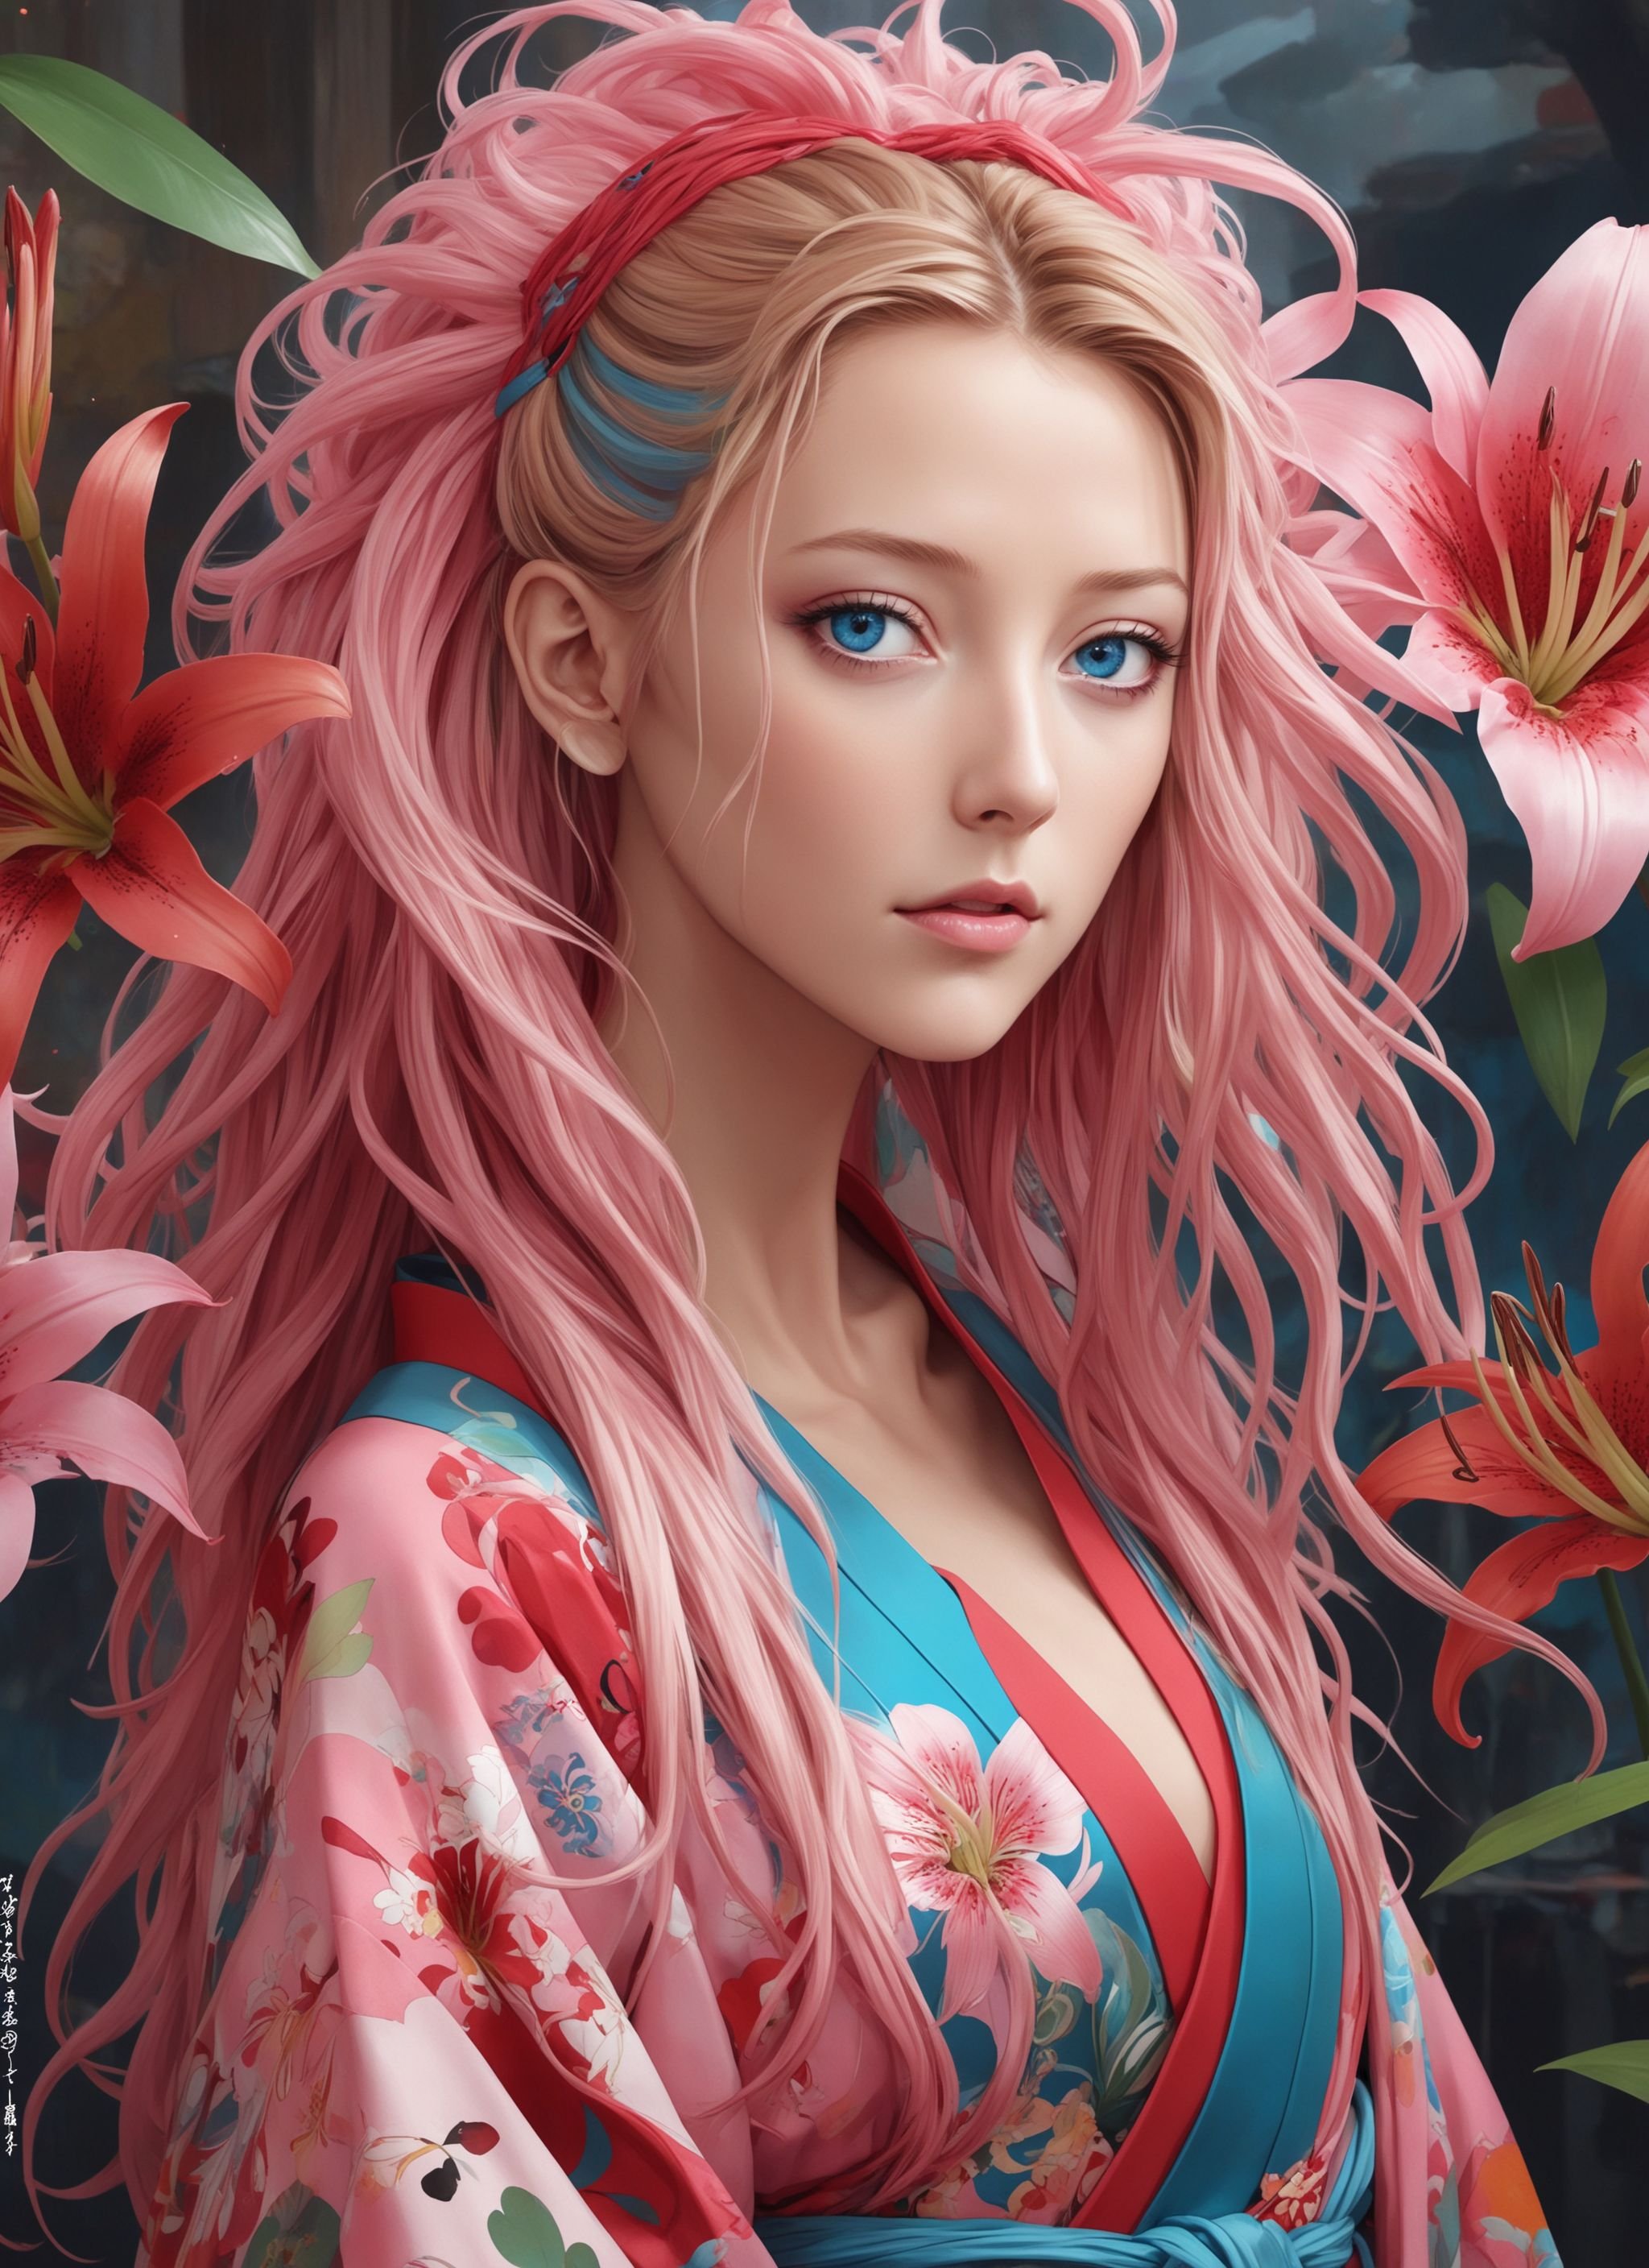 epresentation of blake lively plus grow fashionable with pink long messy bangs and large blue eyes, with slit pupils visible undergarments and colorful dreadlocks, elaborate delicate glorious perfect kimono set, luxearte portrait, dream and tragedy, vivid crimson lilies, artgerm, ruan jia, ross tran, wlop, takashi murakami, studio ghibli